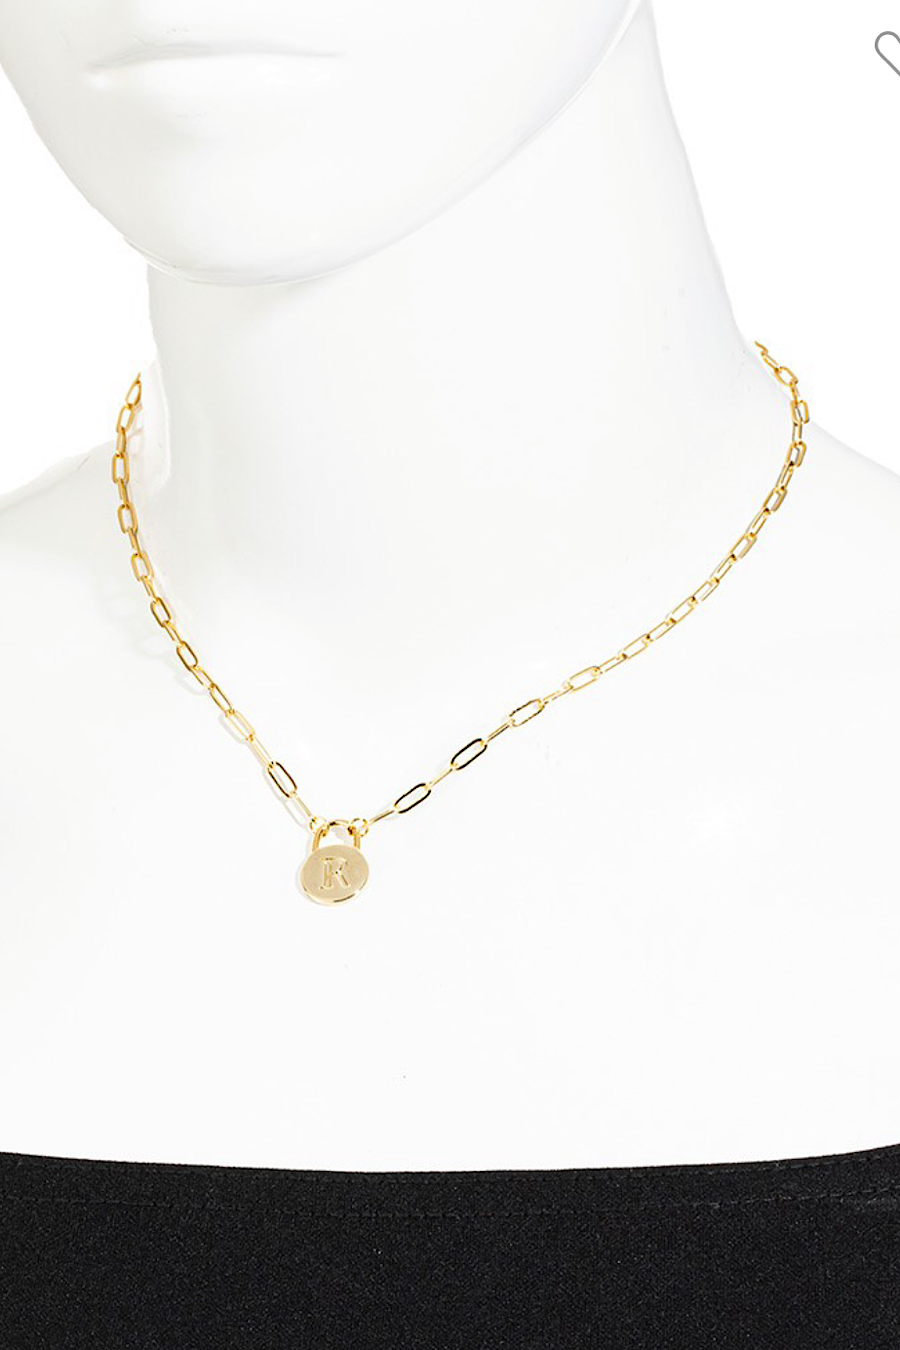 Initial Lock Pendant Necklace Gold